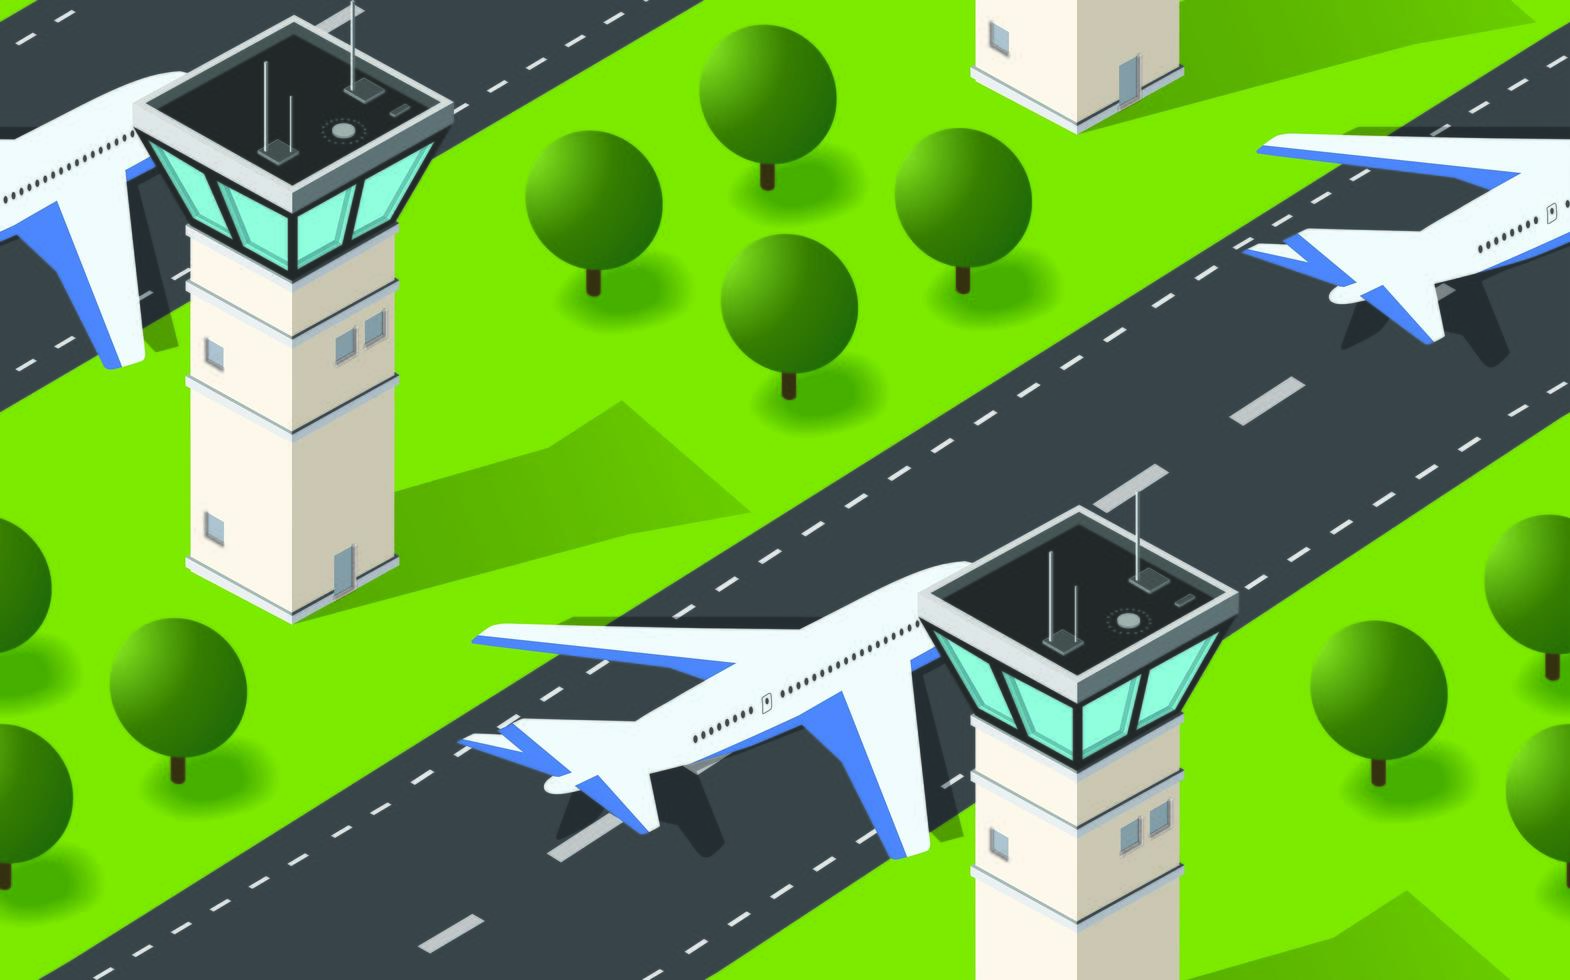 Seamless pattern Isometric 3D city airport with transport aircraft and the runway vector